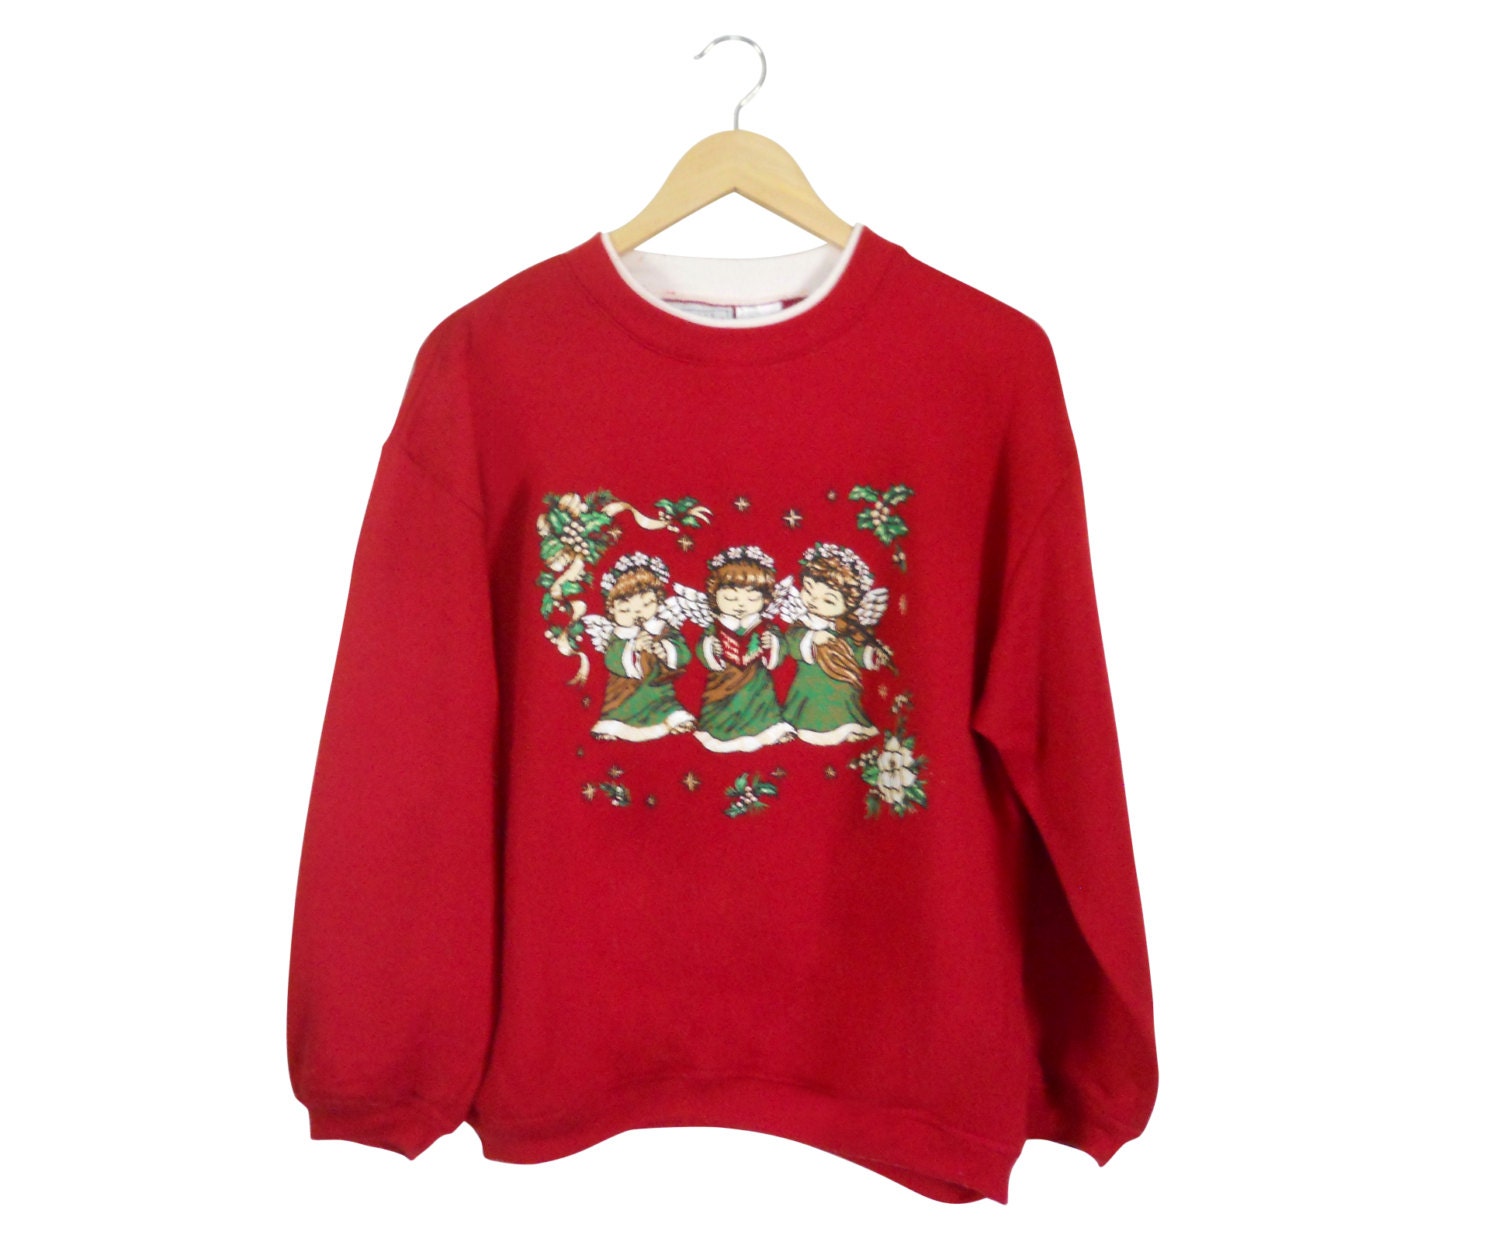 Ugly Christmas Sweater Party Tacky Christmas Sweater Ugly - Etsy